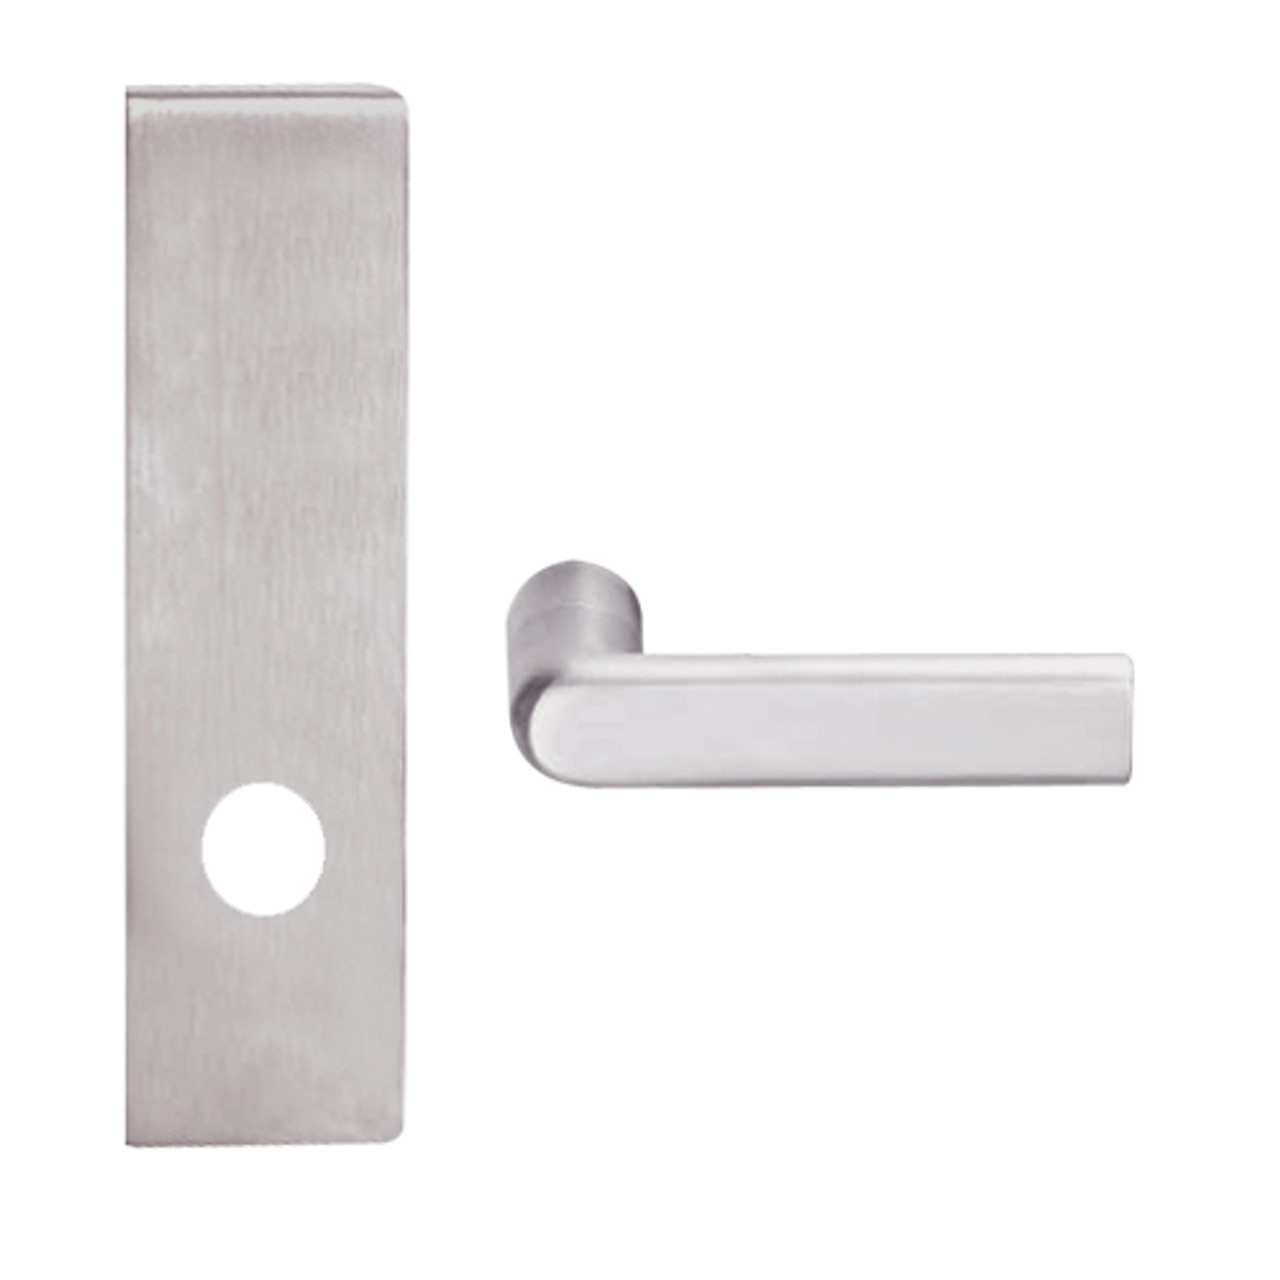 L9025-01N-630 Schlage L Series Exit Commercial Mortise Lock with 01 Cast Lever Design in Satin Stainless Steel